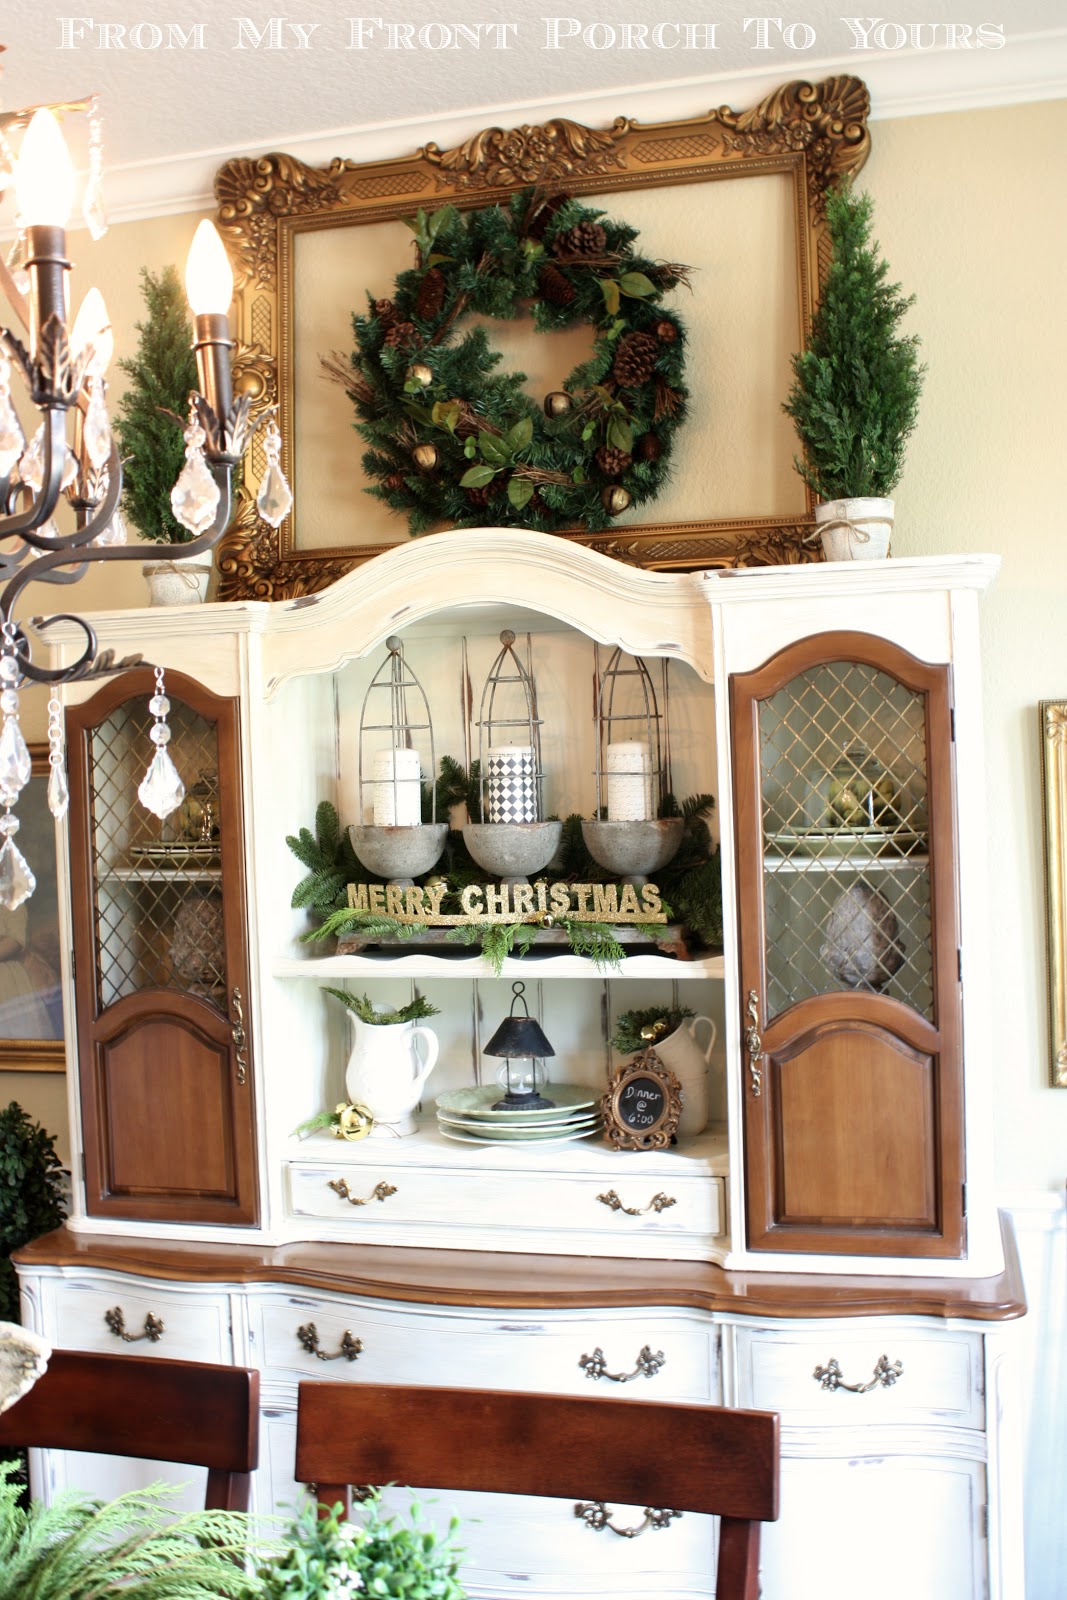 From My Front Porch To Yours: Holiday 2012 Dining Room-Simply Elegant